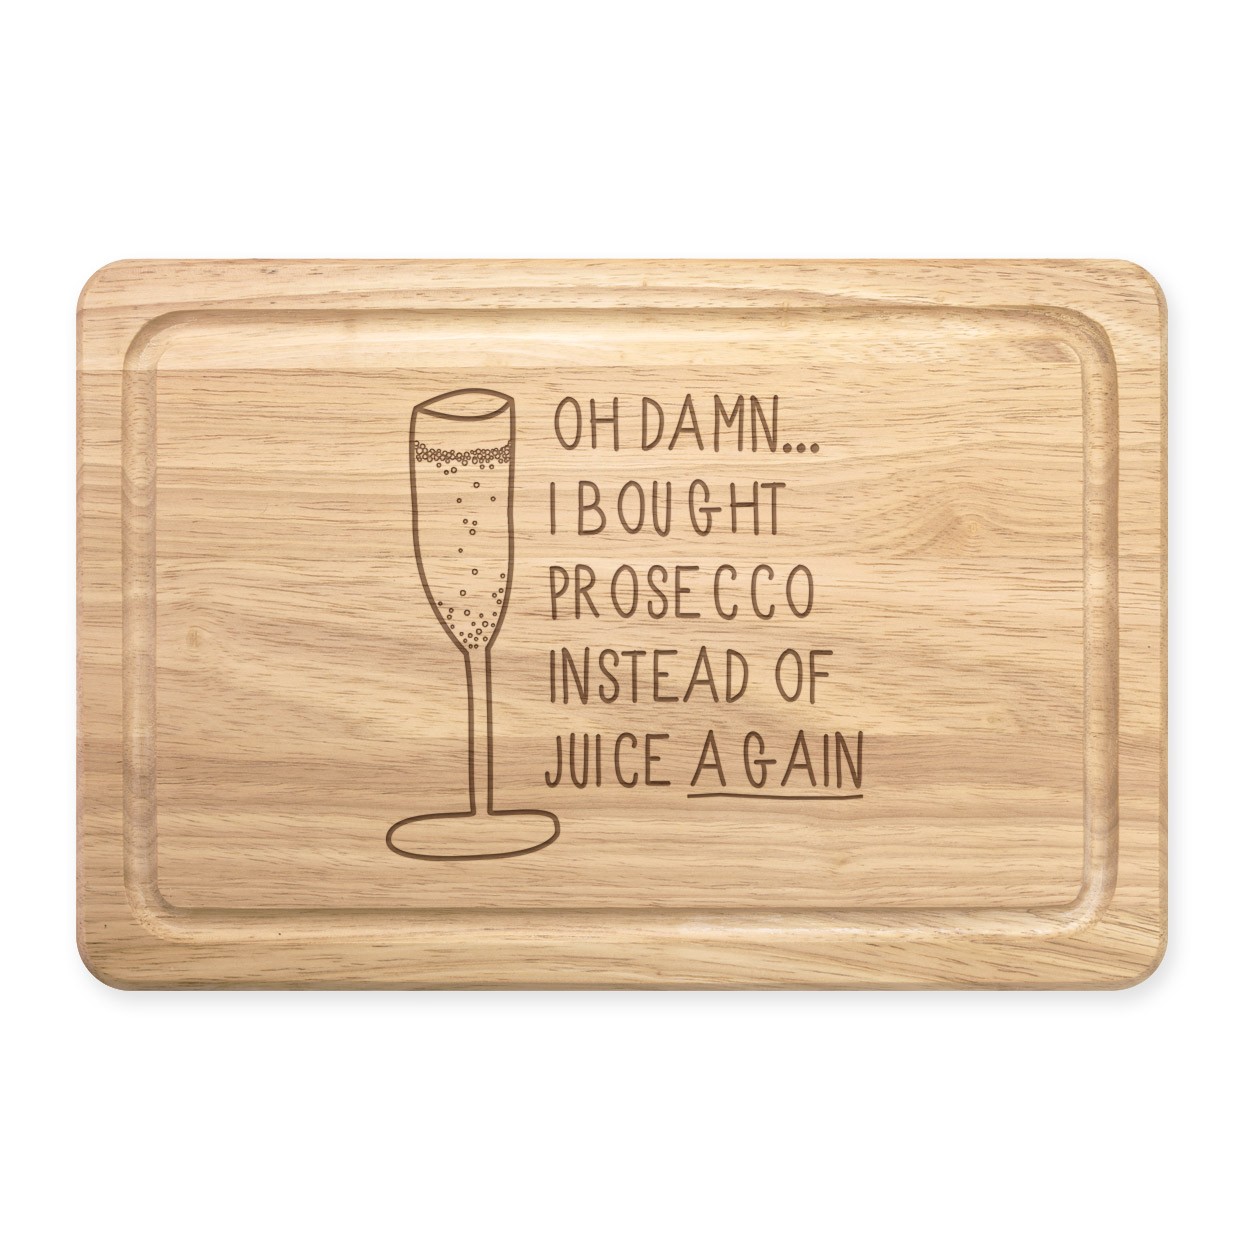 Oh Damn I Bought Prosecco Instead Of Juice Again Rectangular Wooden Chopping Board